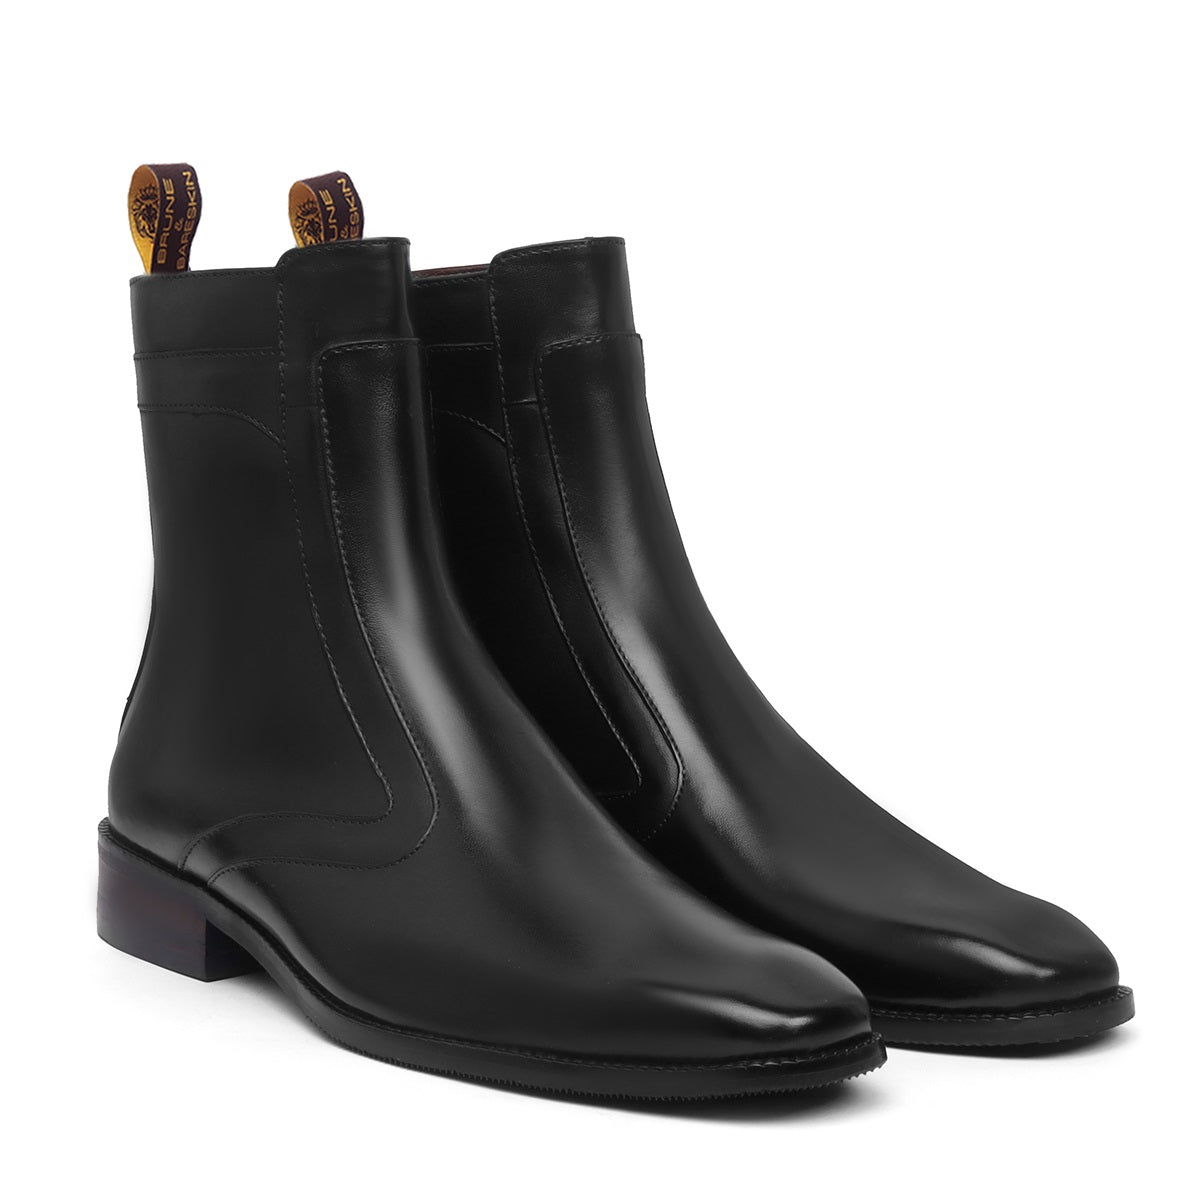 Quarter Layered Stitched Zip Closure Black Leather Chelsea Boots by Brune & Bareskin